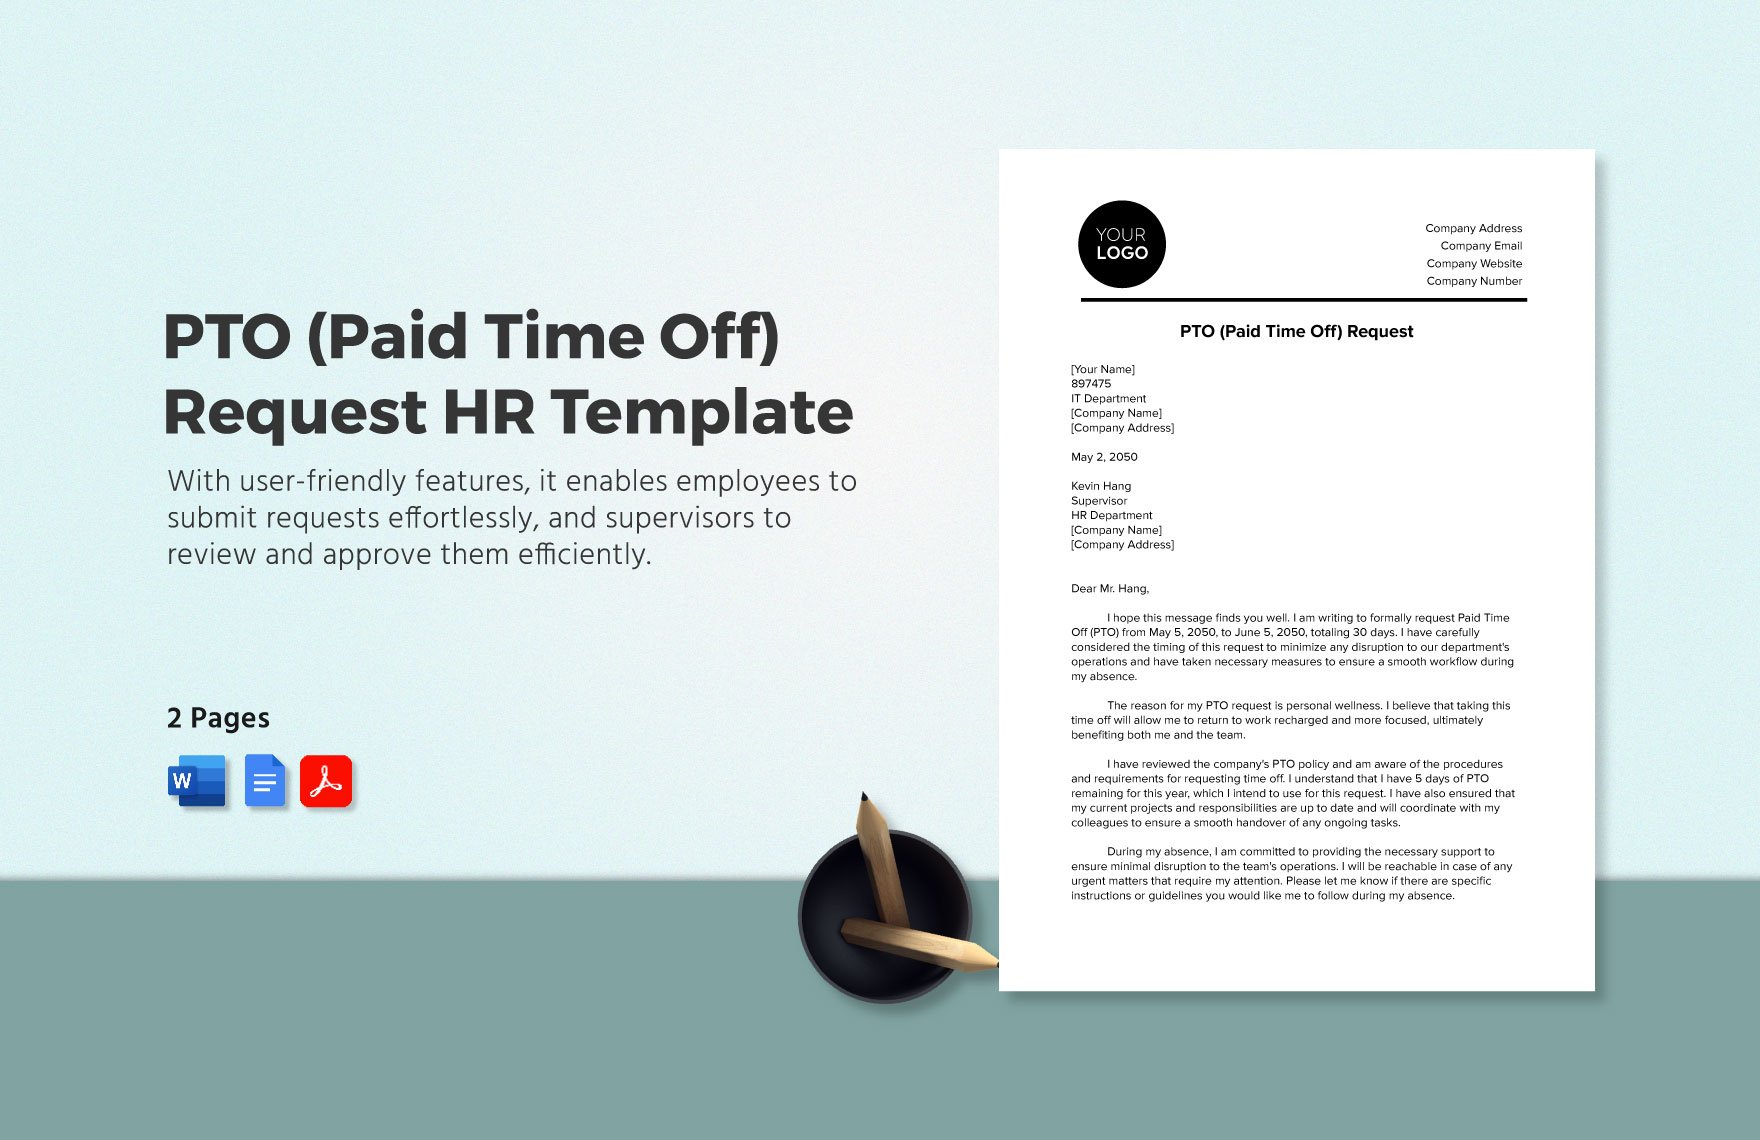 PTO (Paid Time Off) Request HR Template in Word, Google Docs, PDF